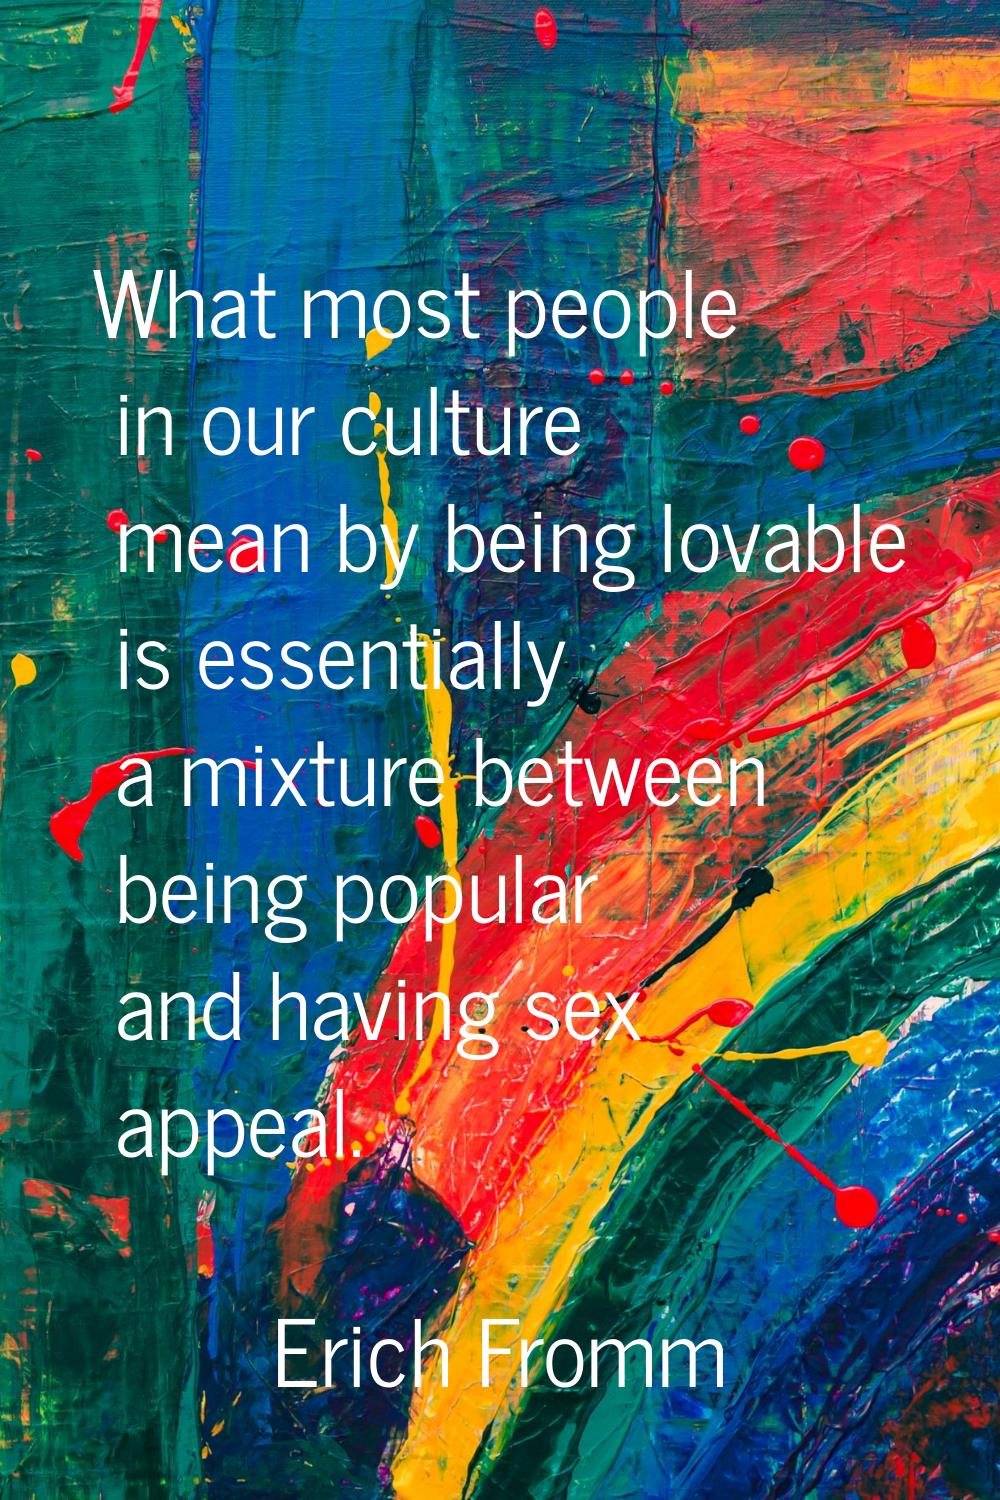 What most people in our culture mean by being lovable is essentially a mixture between being popula